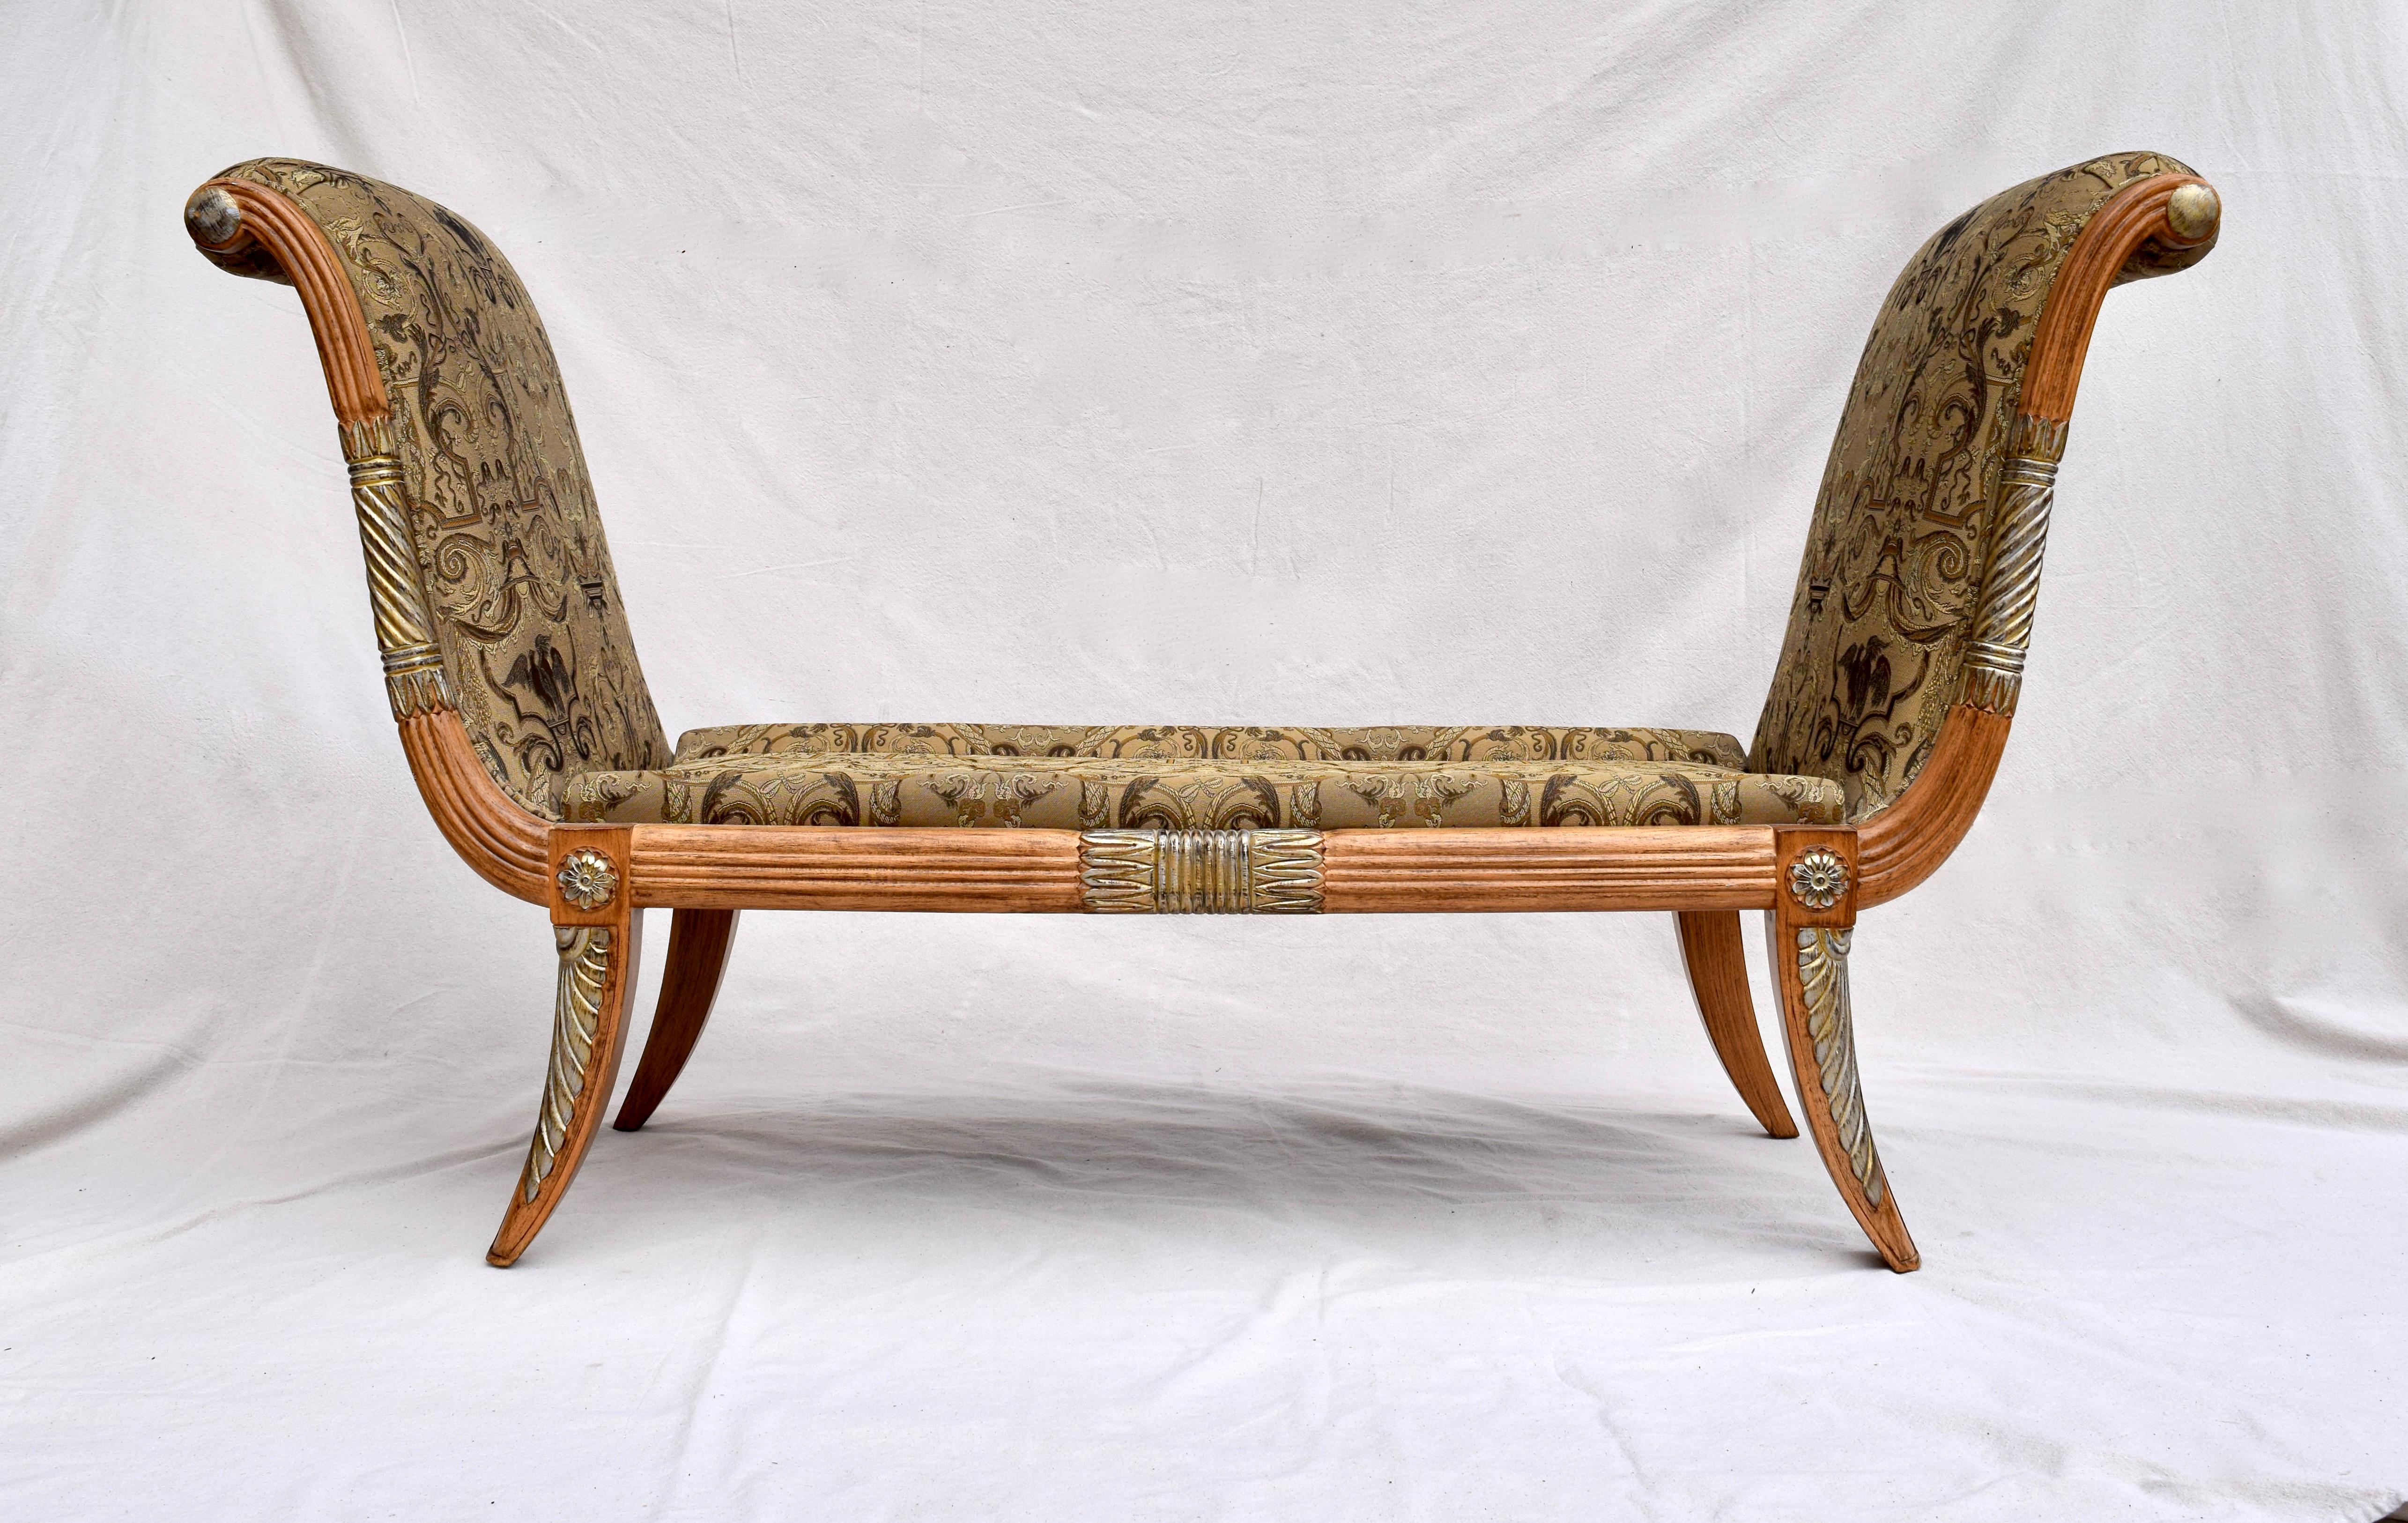 Maitland Smith neoclassical style Recamiere settee or scroll arm bench with reed carved body and splayed legs enhanced with silver leaf accents. Newly upholstered in rich detail damask of classical cherubs and eagle design, the single, loose cushion